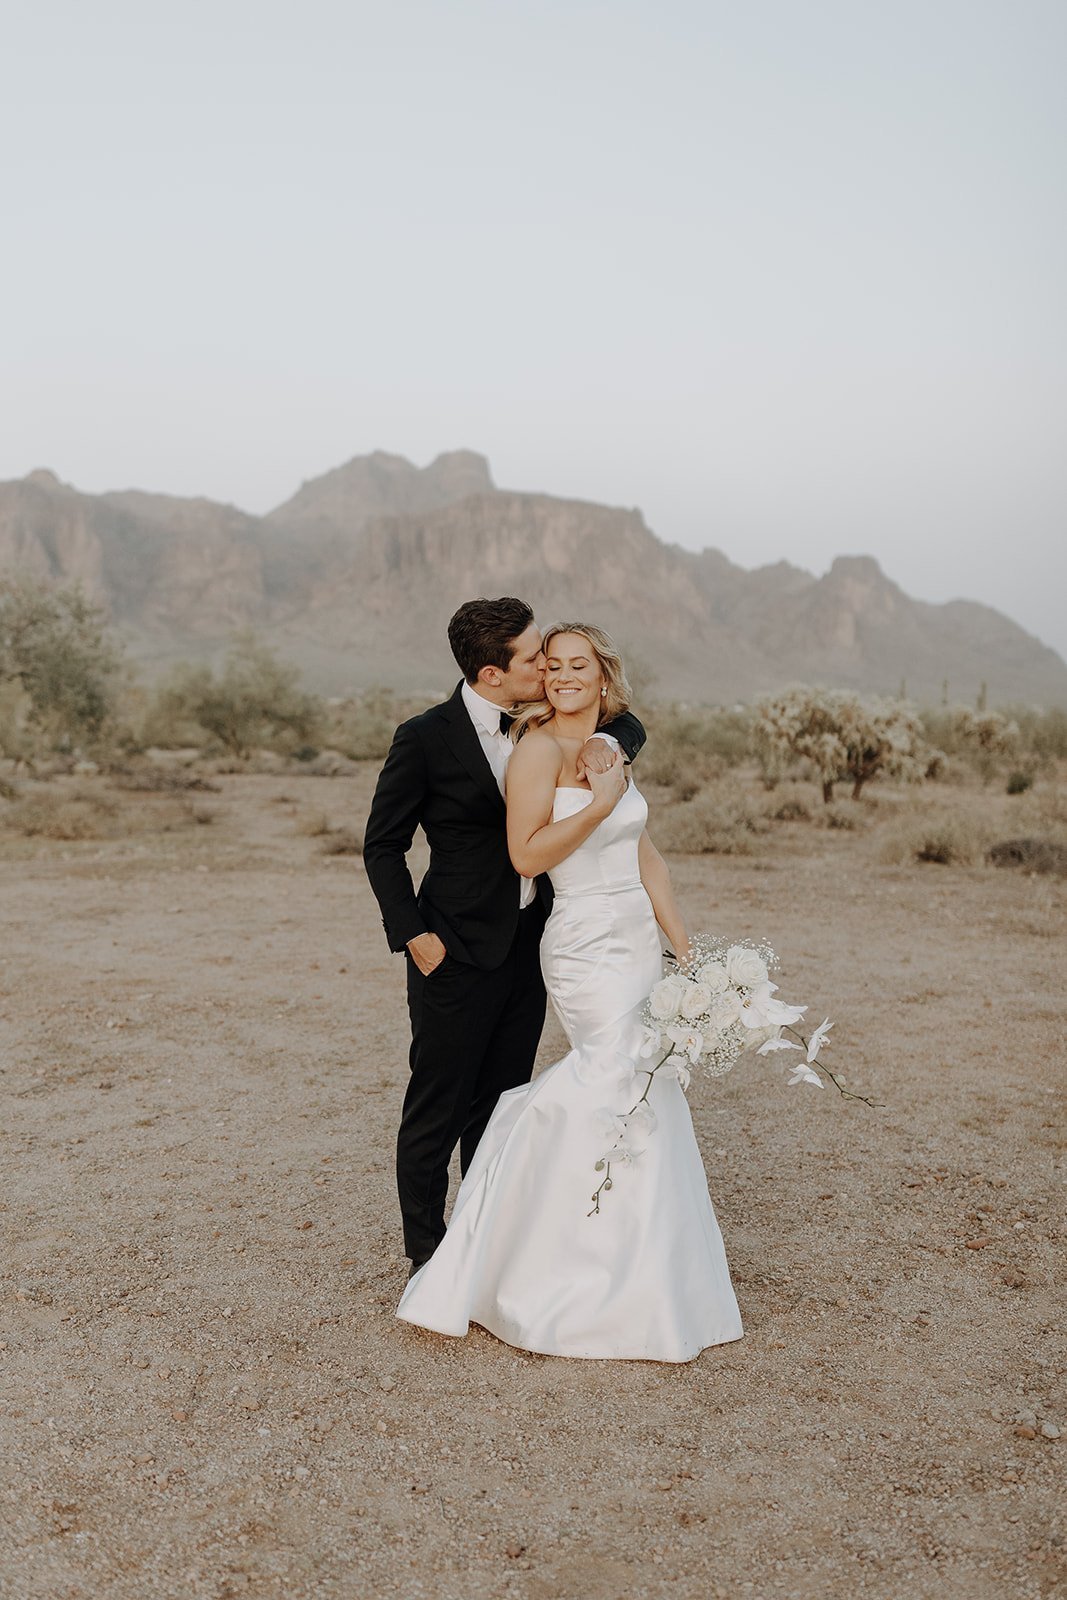 Groom kisses bride on the cheek during couple photos at their desert wedding 